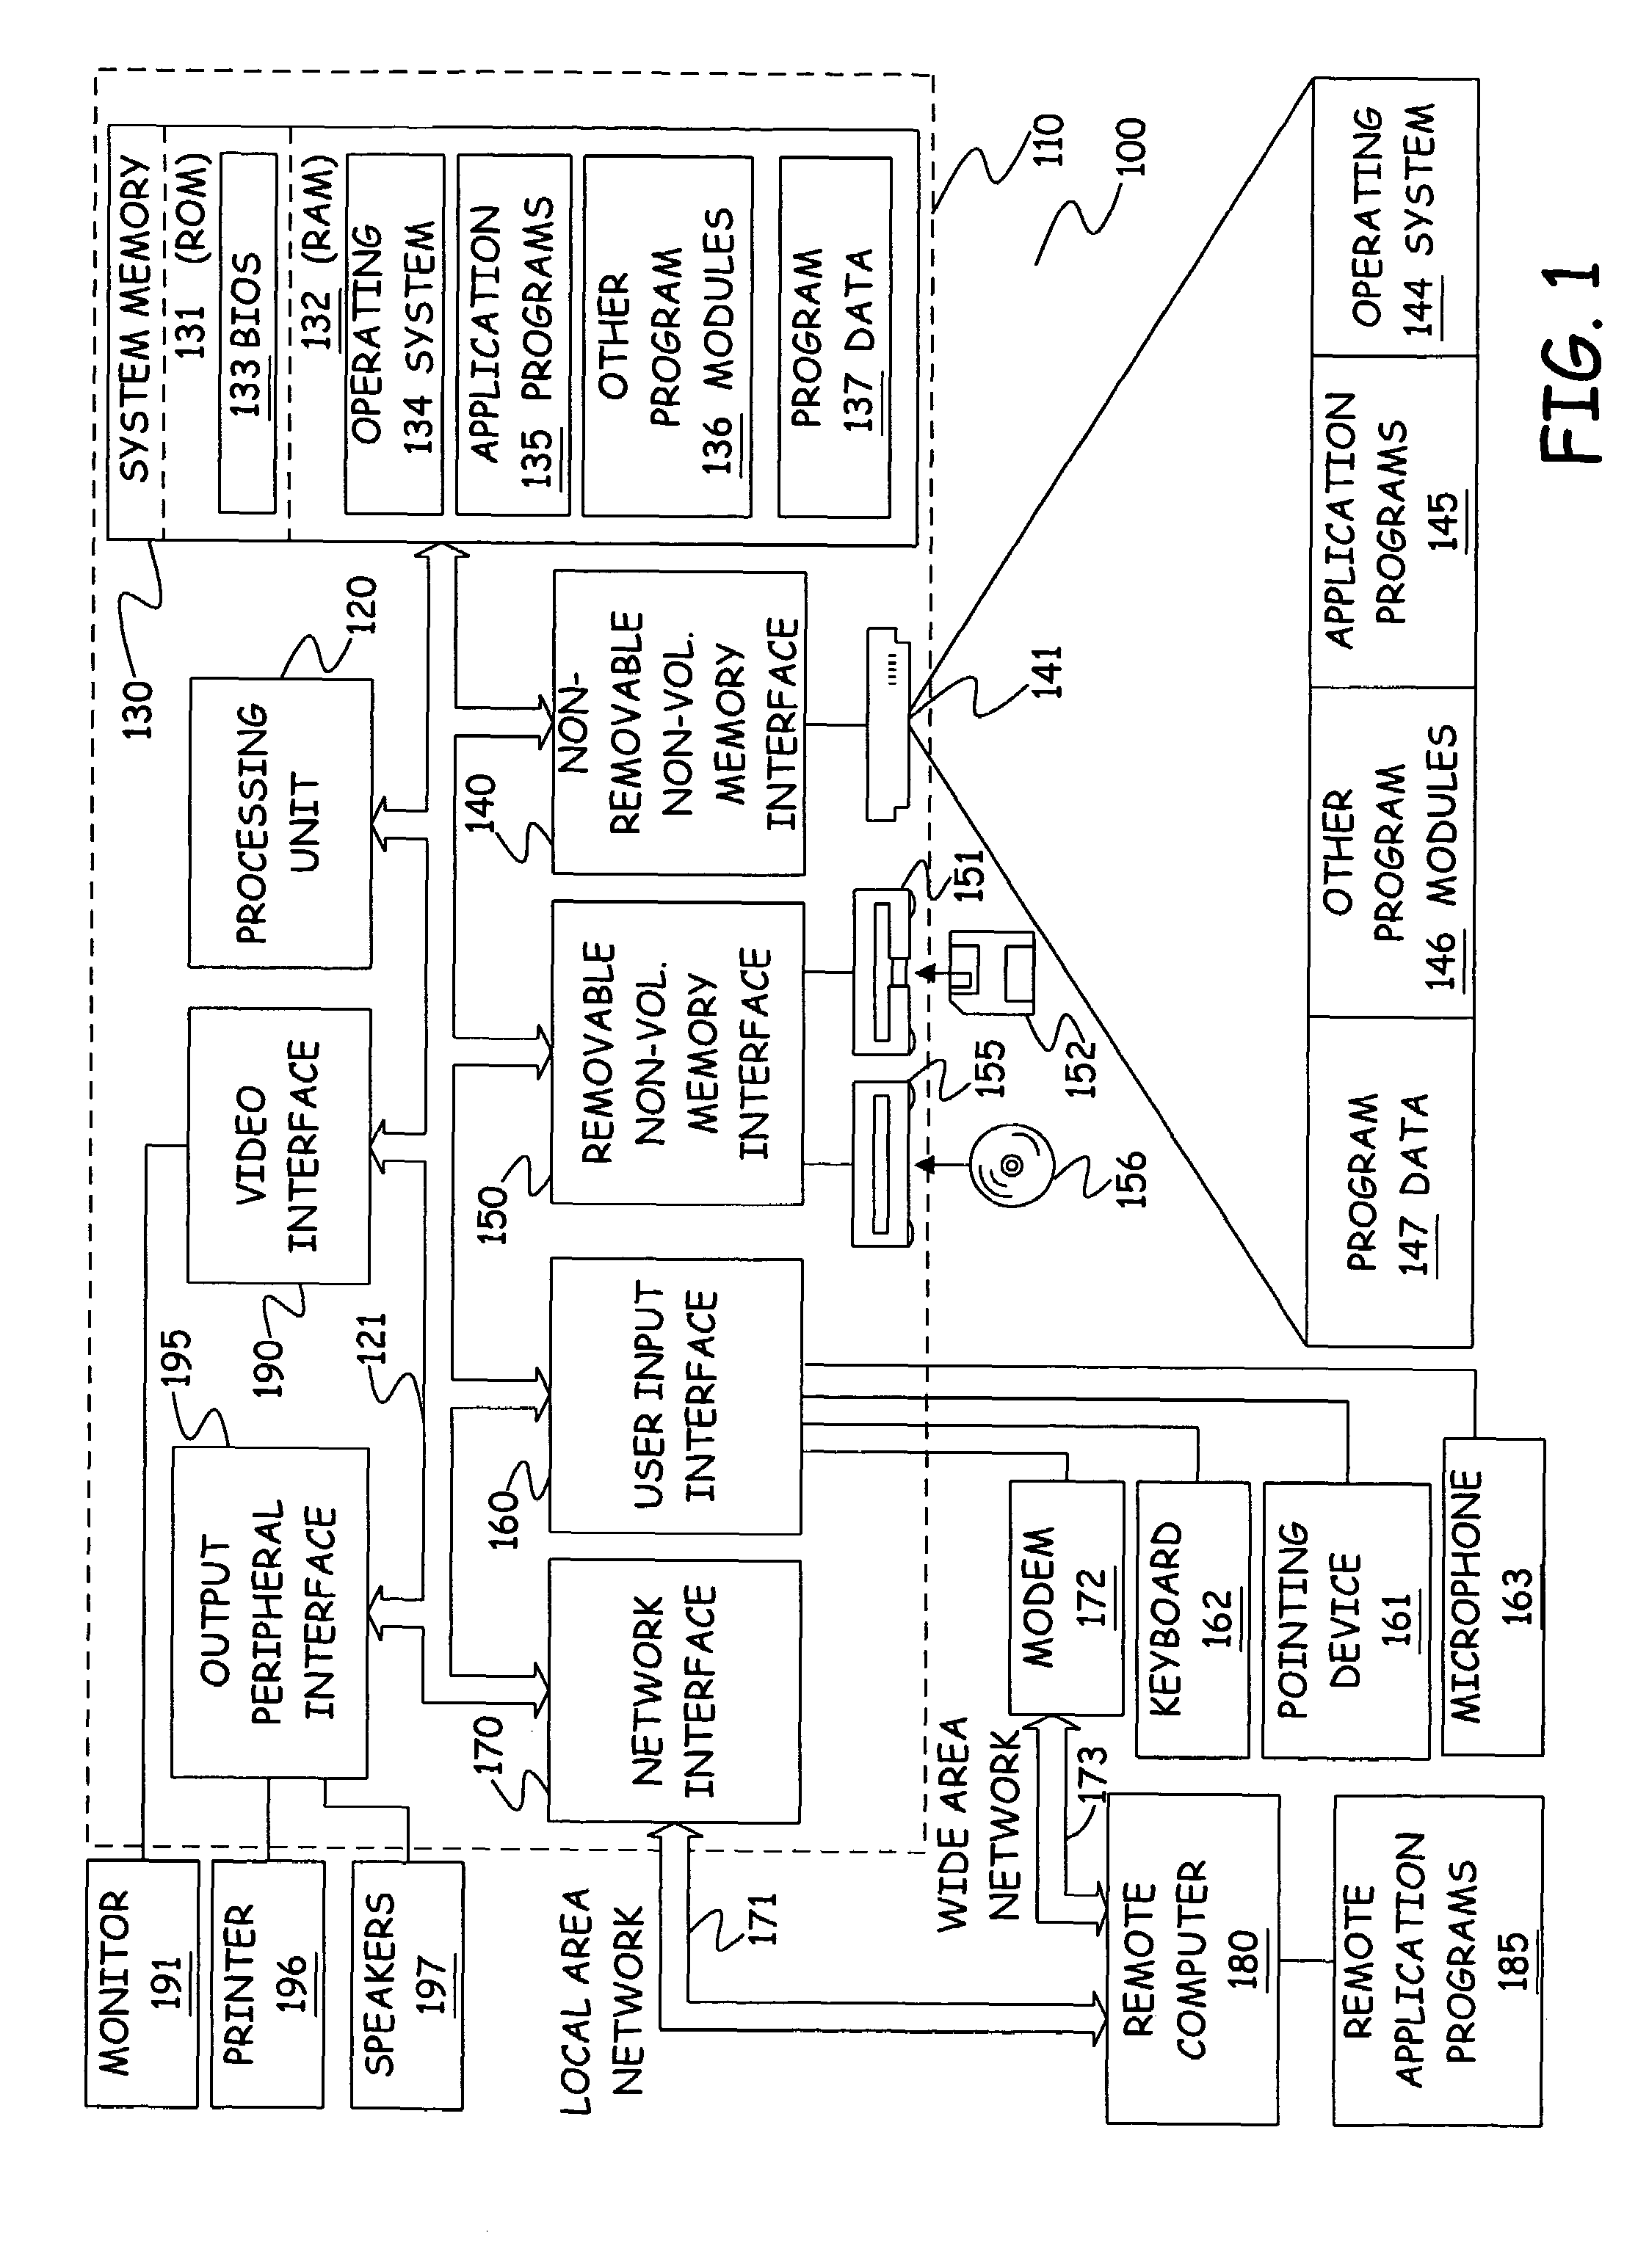 Method and apparatus for mapping a data model to a user interface model